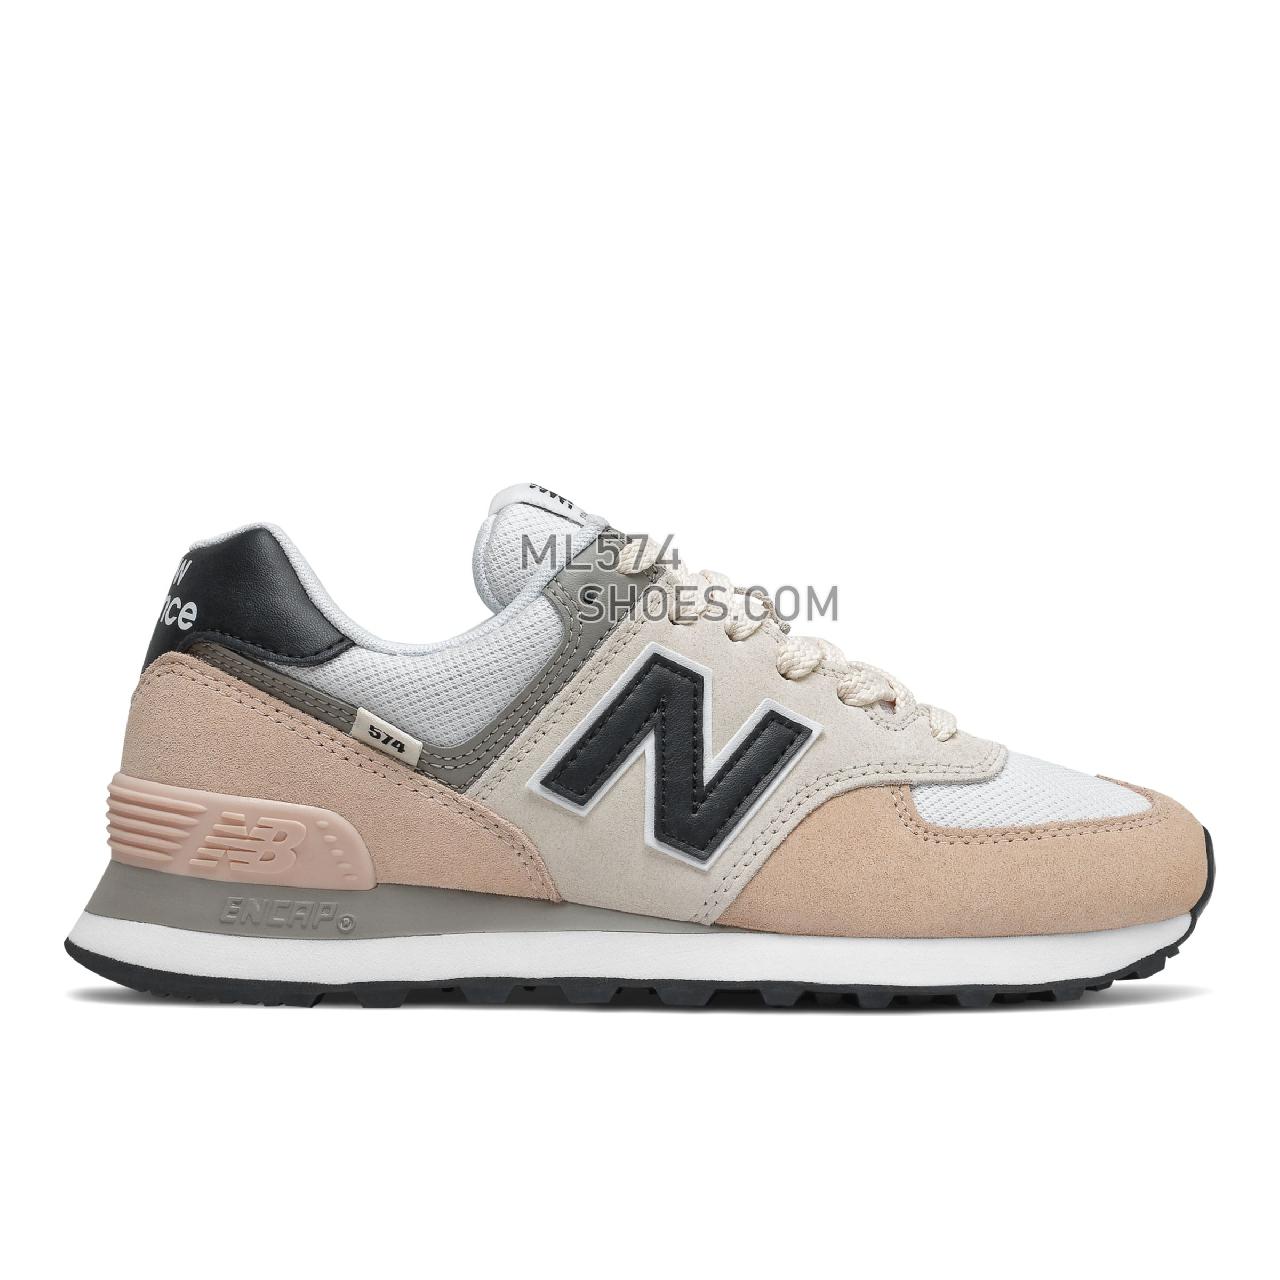 New Balance 574 - Women's Classic Sneakers - Rose Water with Black - WL574SK2